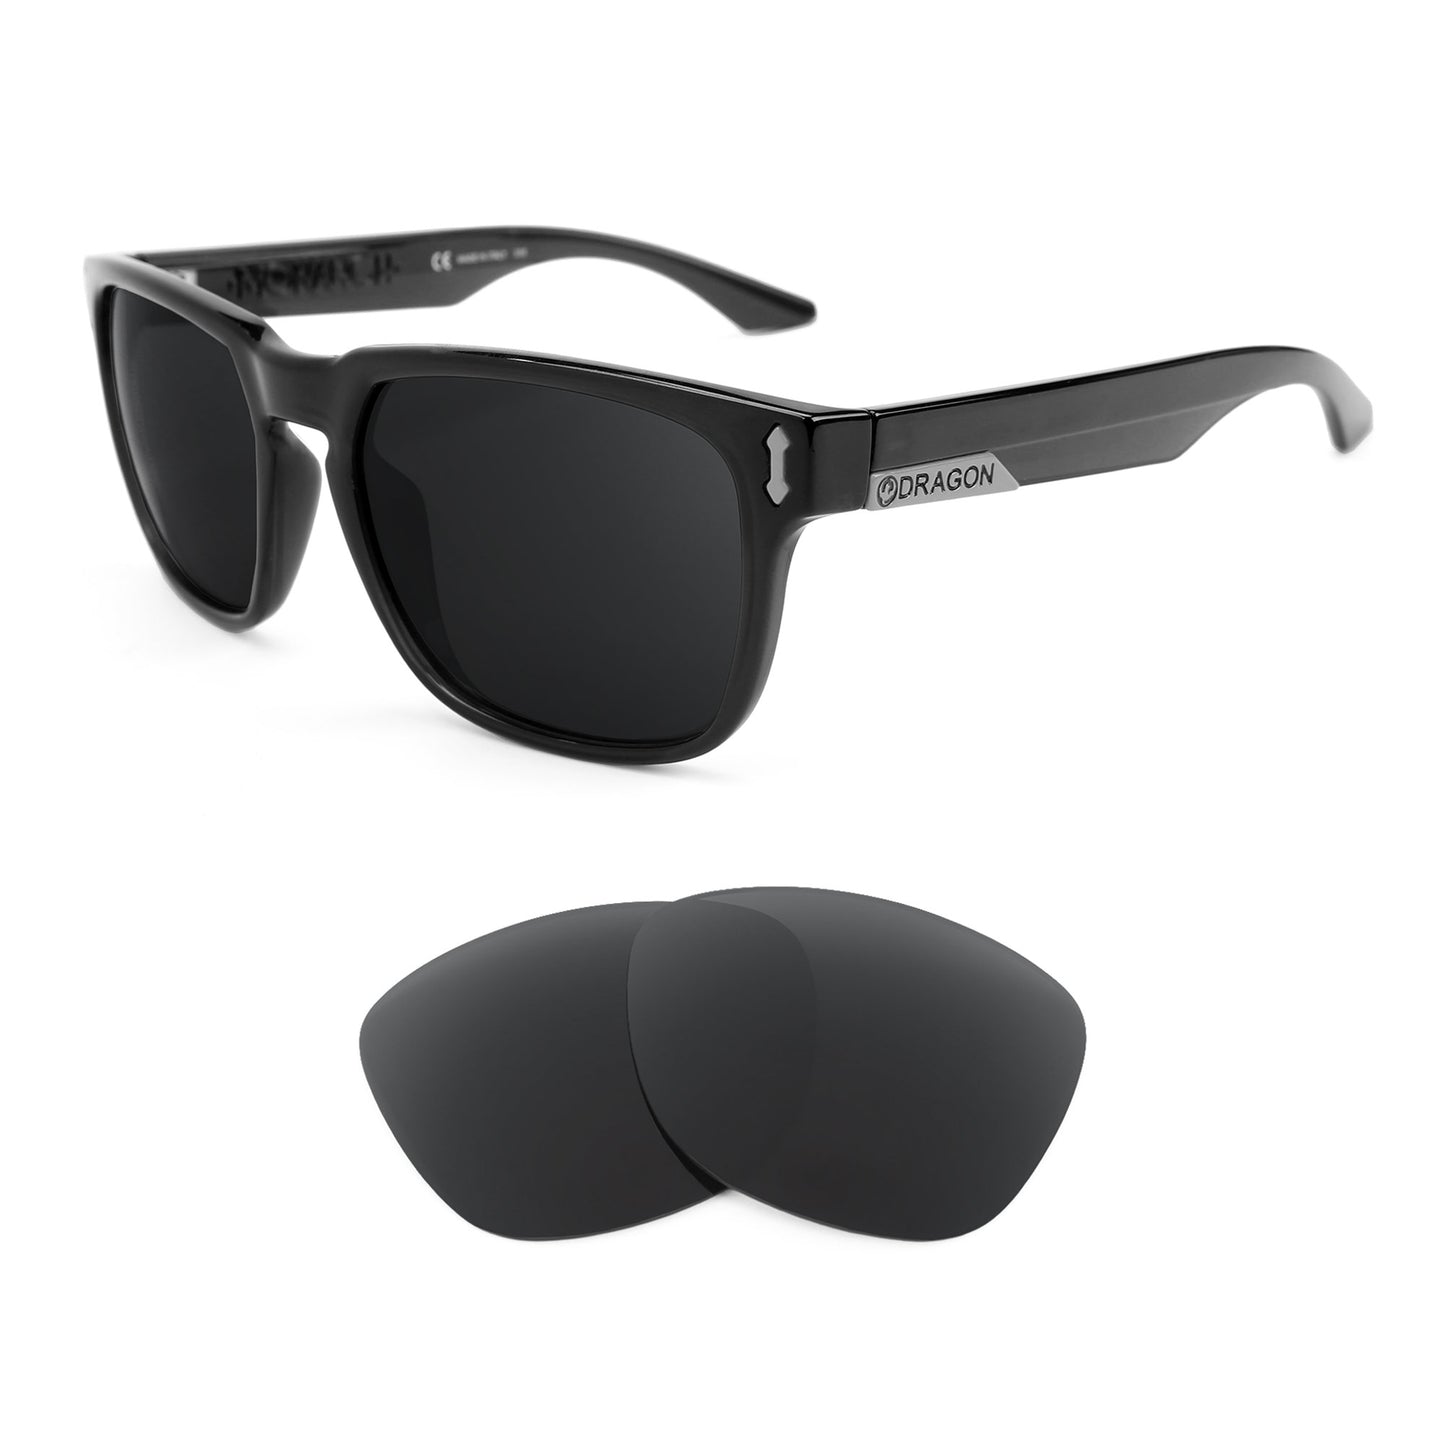 Dragon Monarch sunglasses with replacement lenses